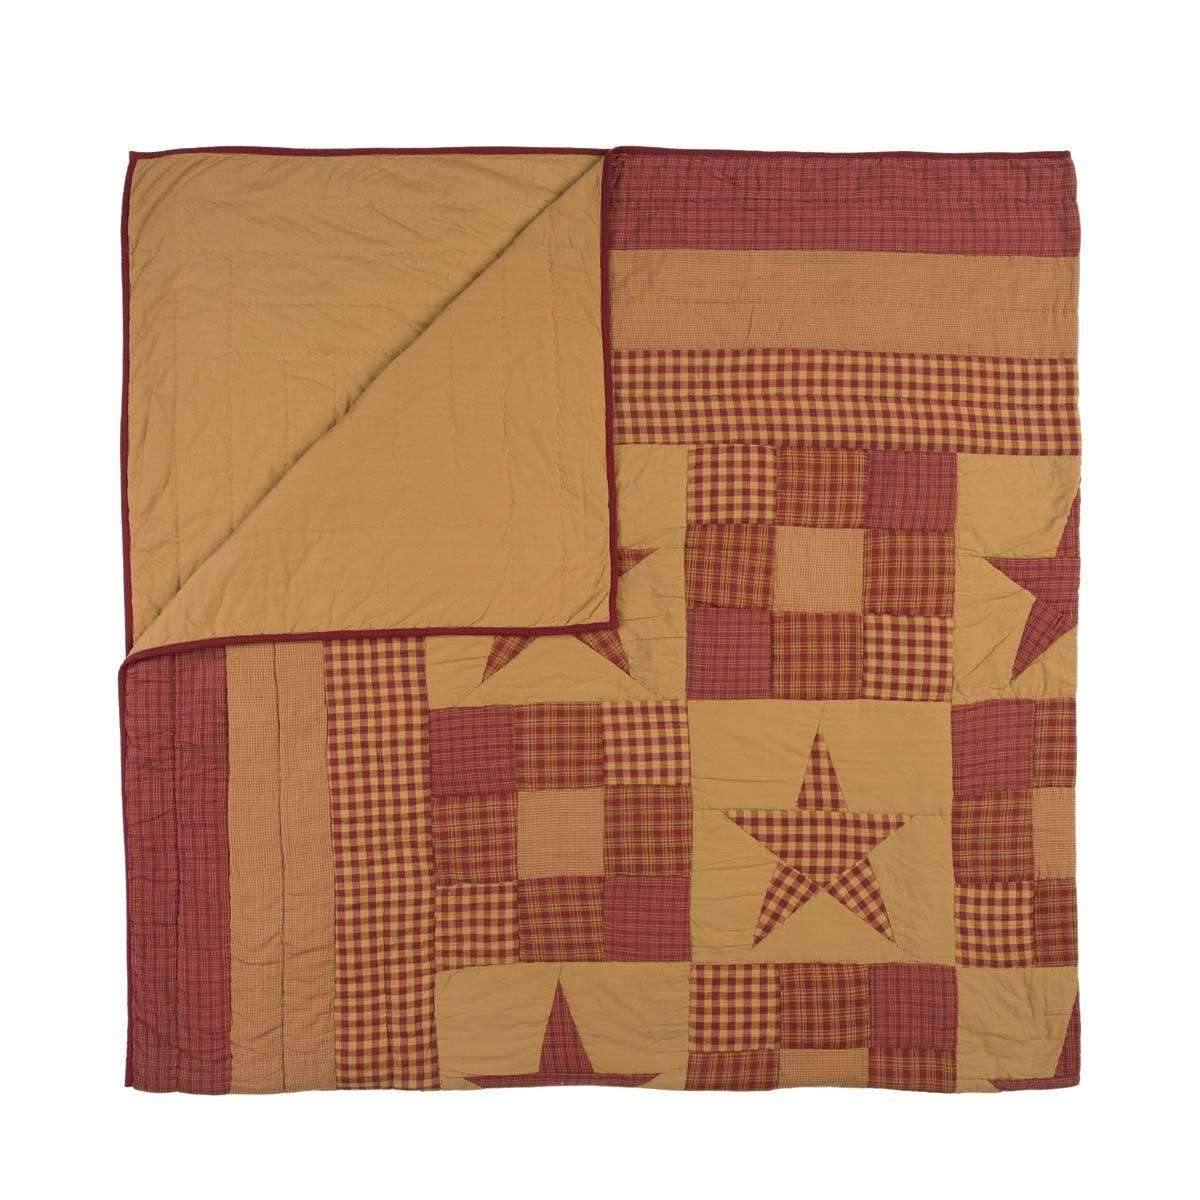 Ninepatch Star Luxury King Quilt 120Wx105L VHC Brands folded